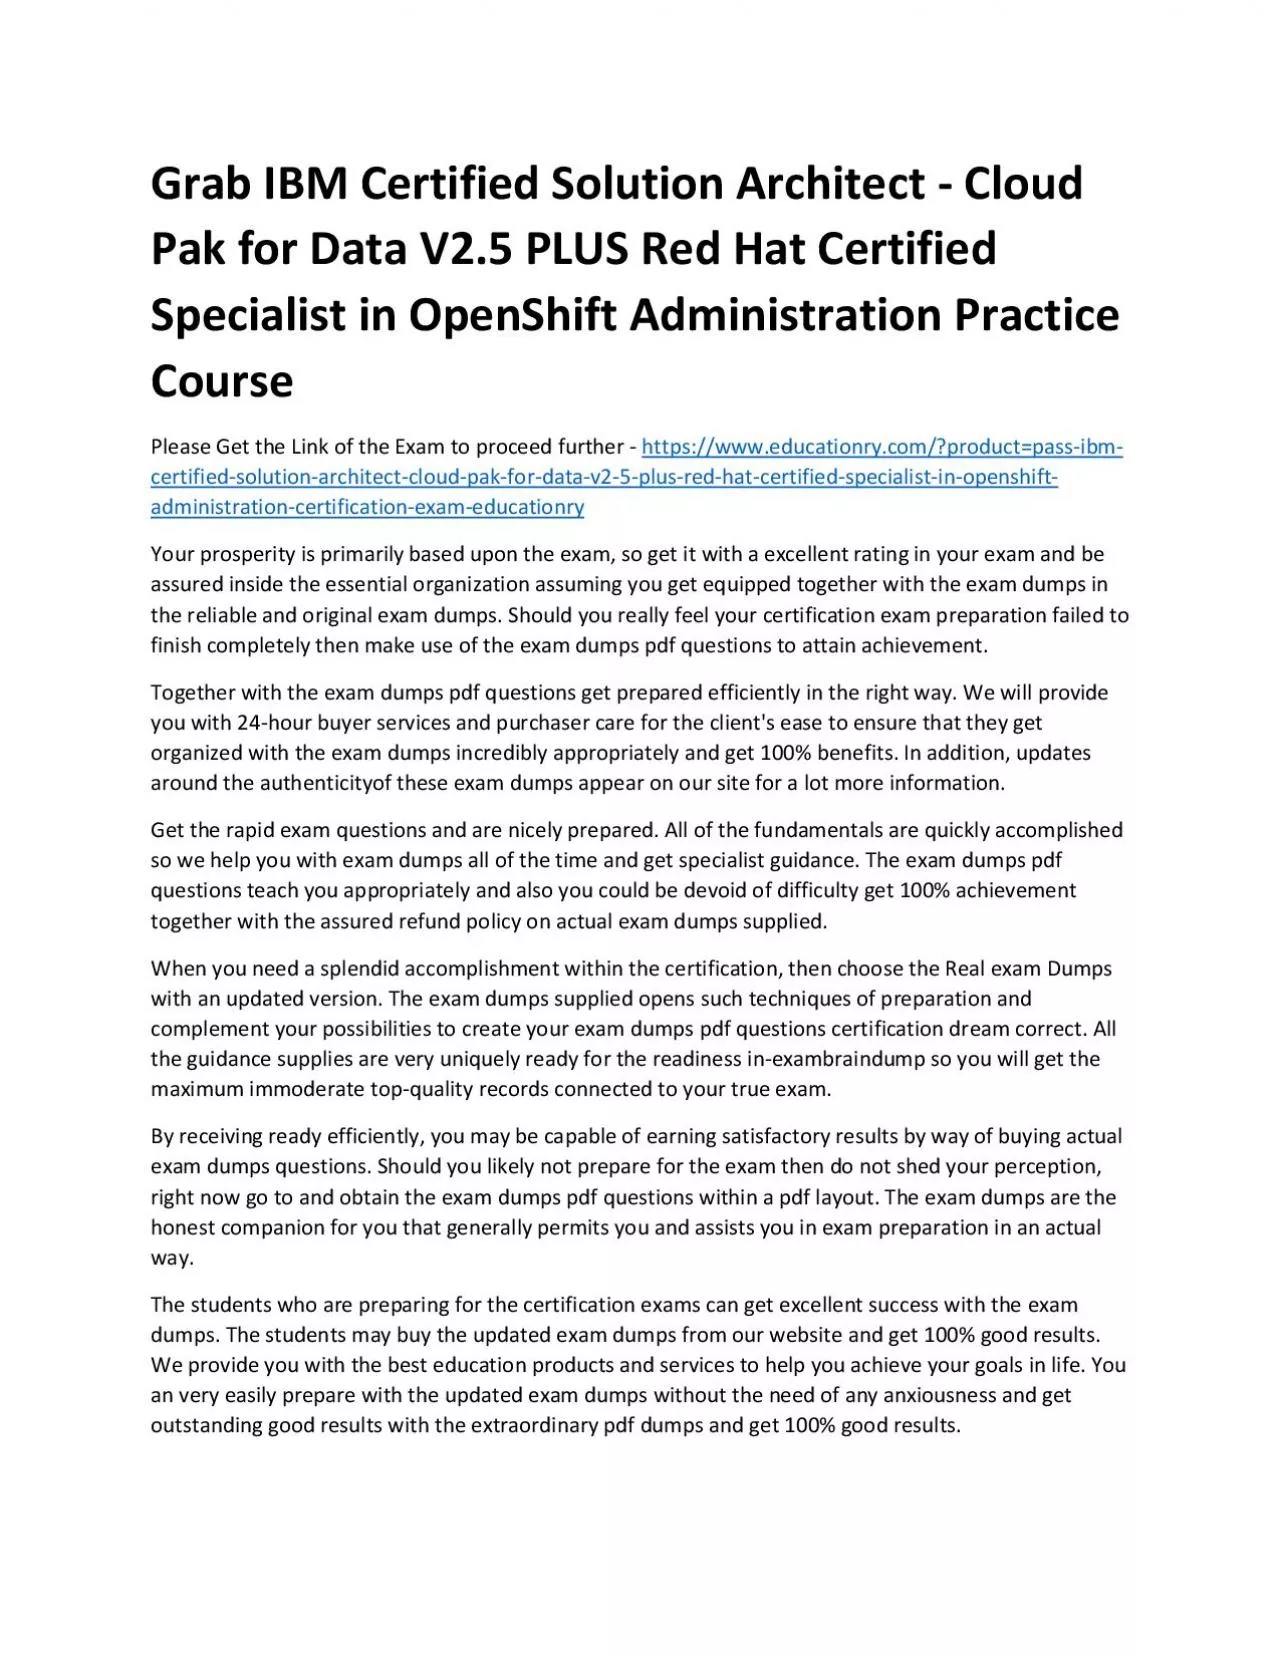 C0004600: IBM Certified Solution Architect - Cloud Pak for Data V2.5 PLUS Red Hat Certified